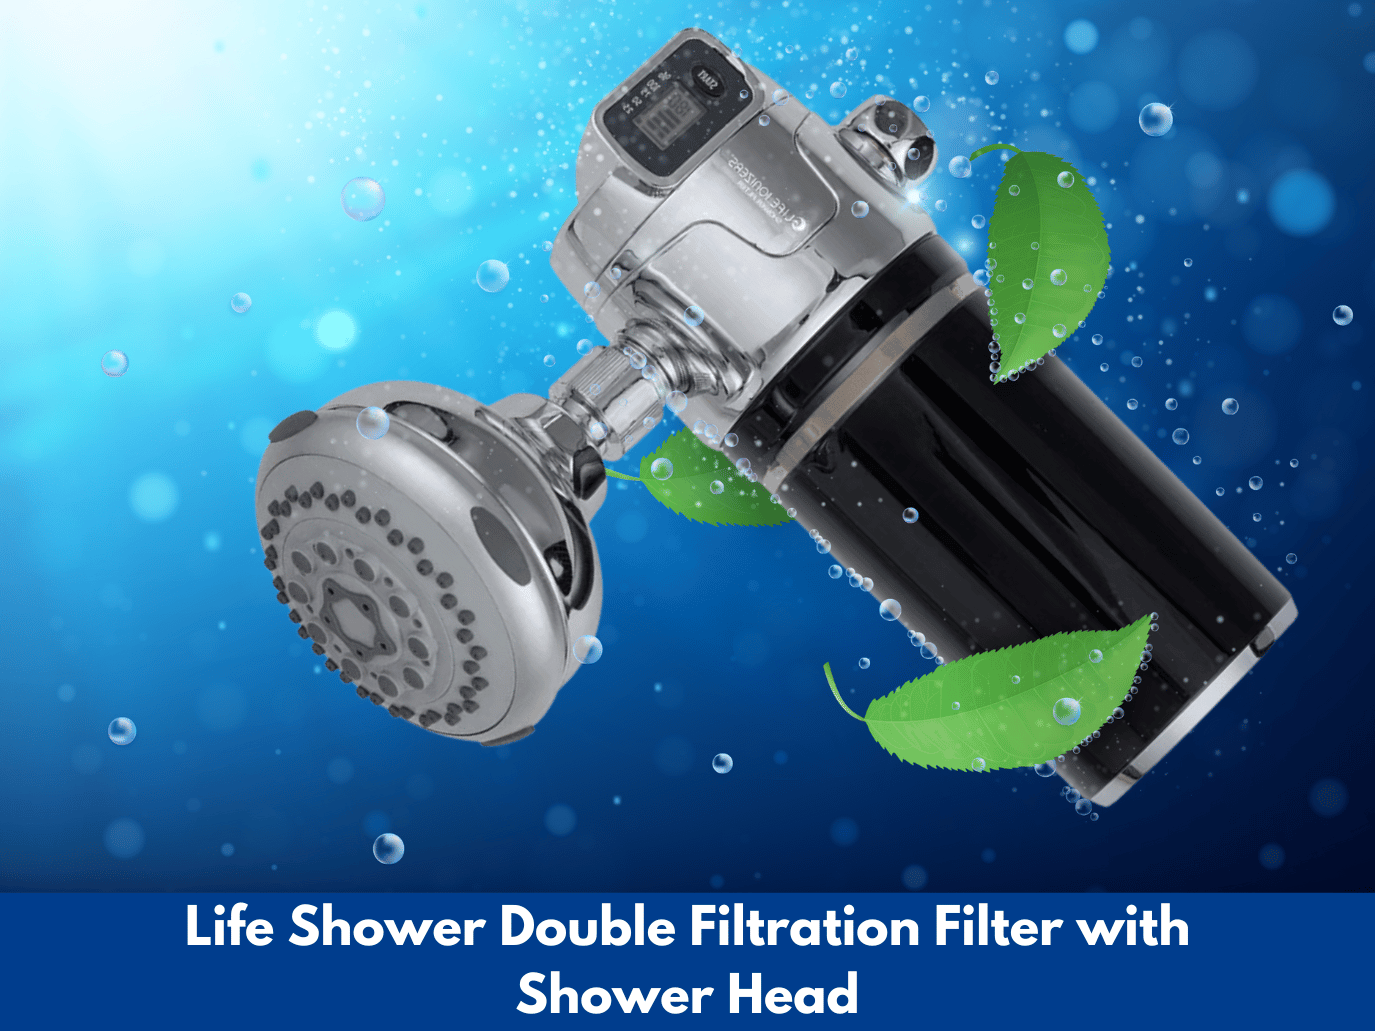 How a Life Shower Filter Can Help